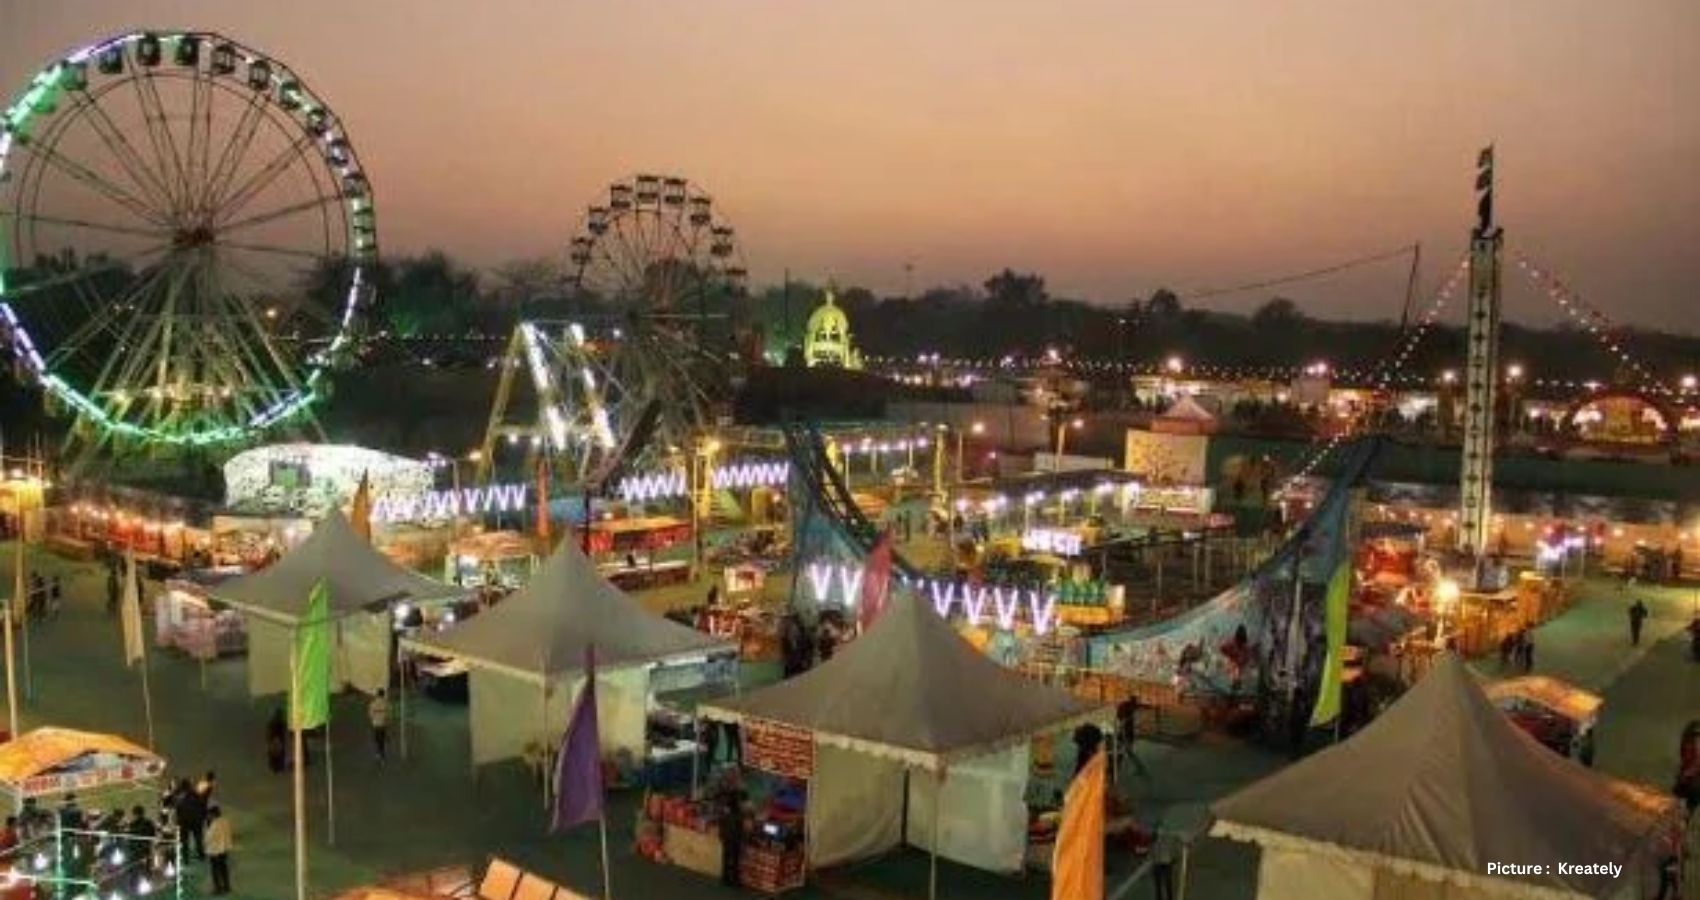 Surajkund Mela: A Colorful Celebration of Culture, Crafts, and Culinary Delights